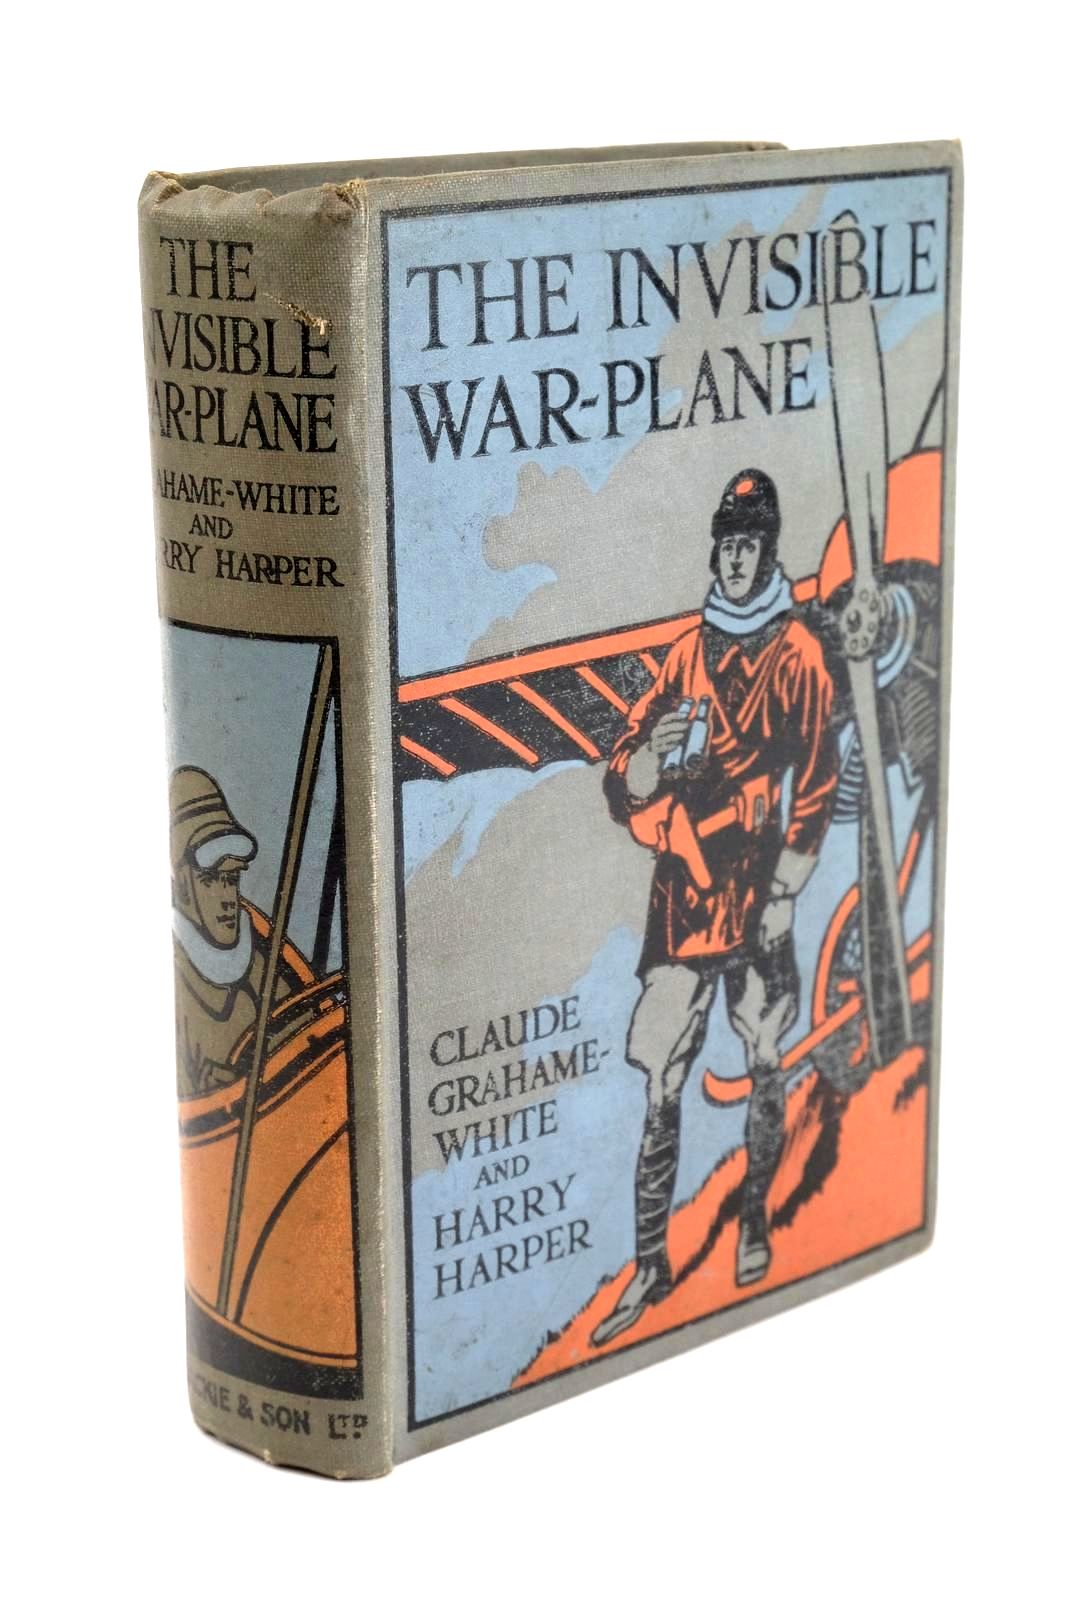 Photo of THE INVISIBLE WAR-PLANE written by Grahame-White, Claude Harper, Harry illustrated by G. Bryan, John De published by Blackie &amp; Son Ltd. (STOCK CODE: 1324056)  for sale by Stella & Rose's Books